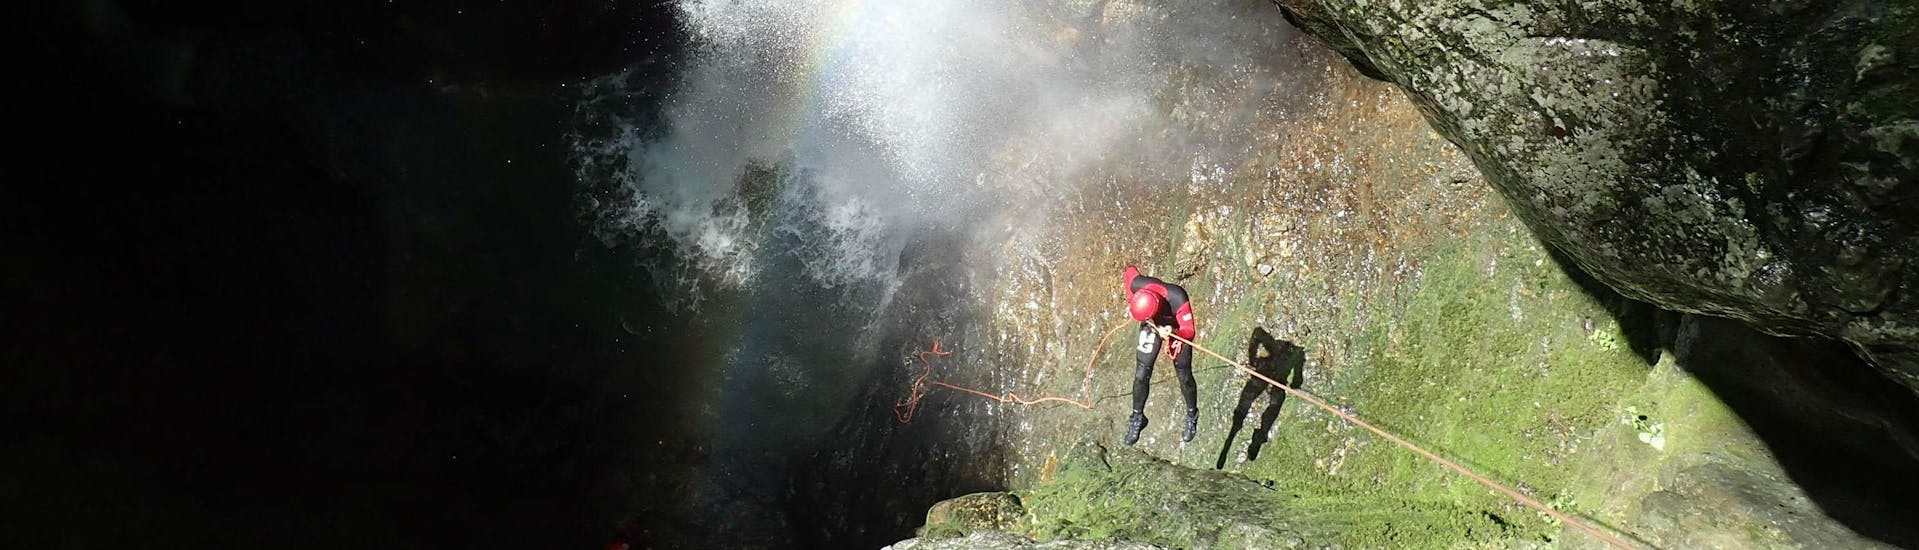 A canyoning enthusiast descends into a gorge by abseiling during a canyoning tour organised by Terréo Canyoning.